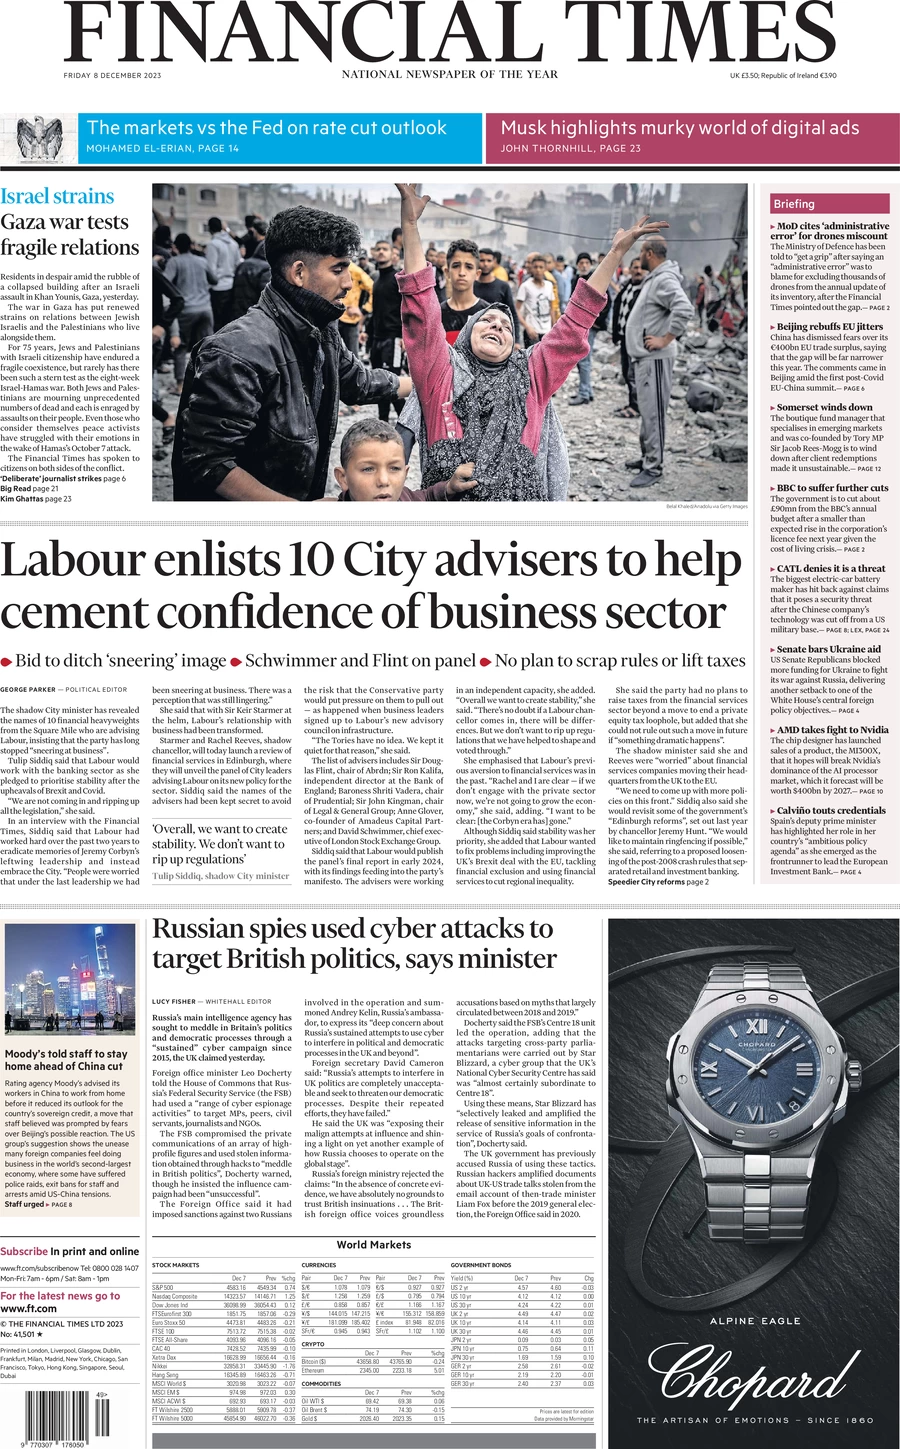 Financial Times - Labour enlists 10 city advisers to help cement confidence in business sector 